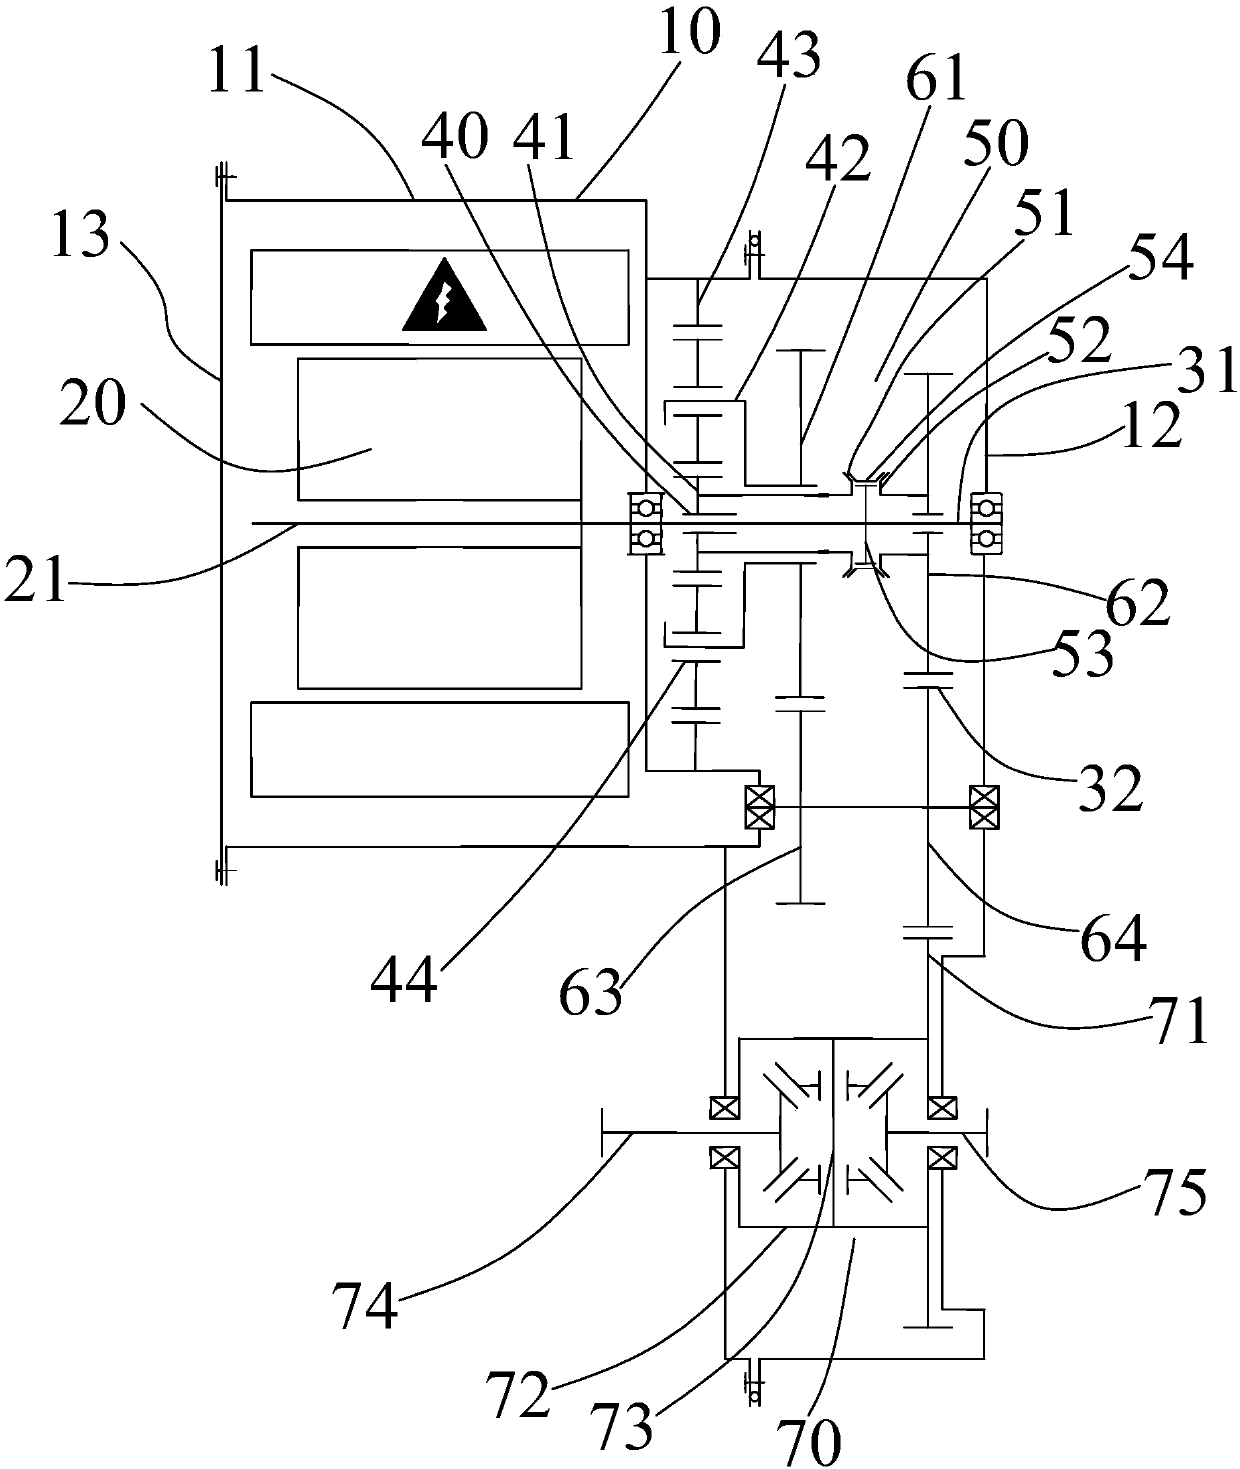 Electrical bridge driving system and vehicle